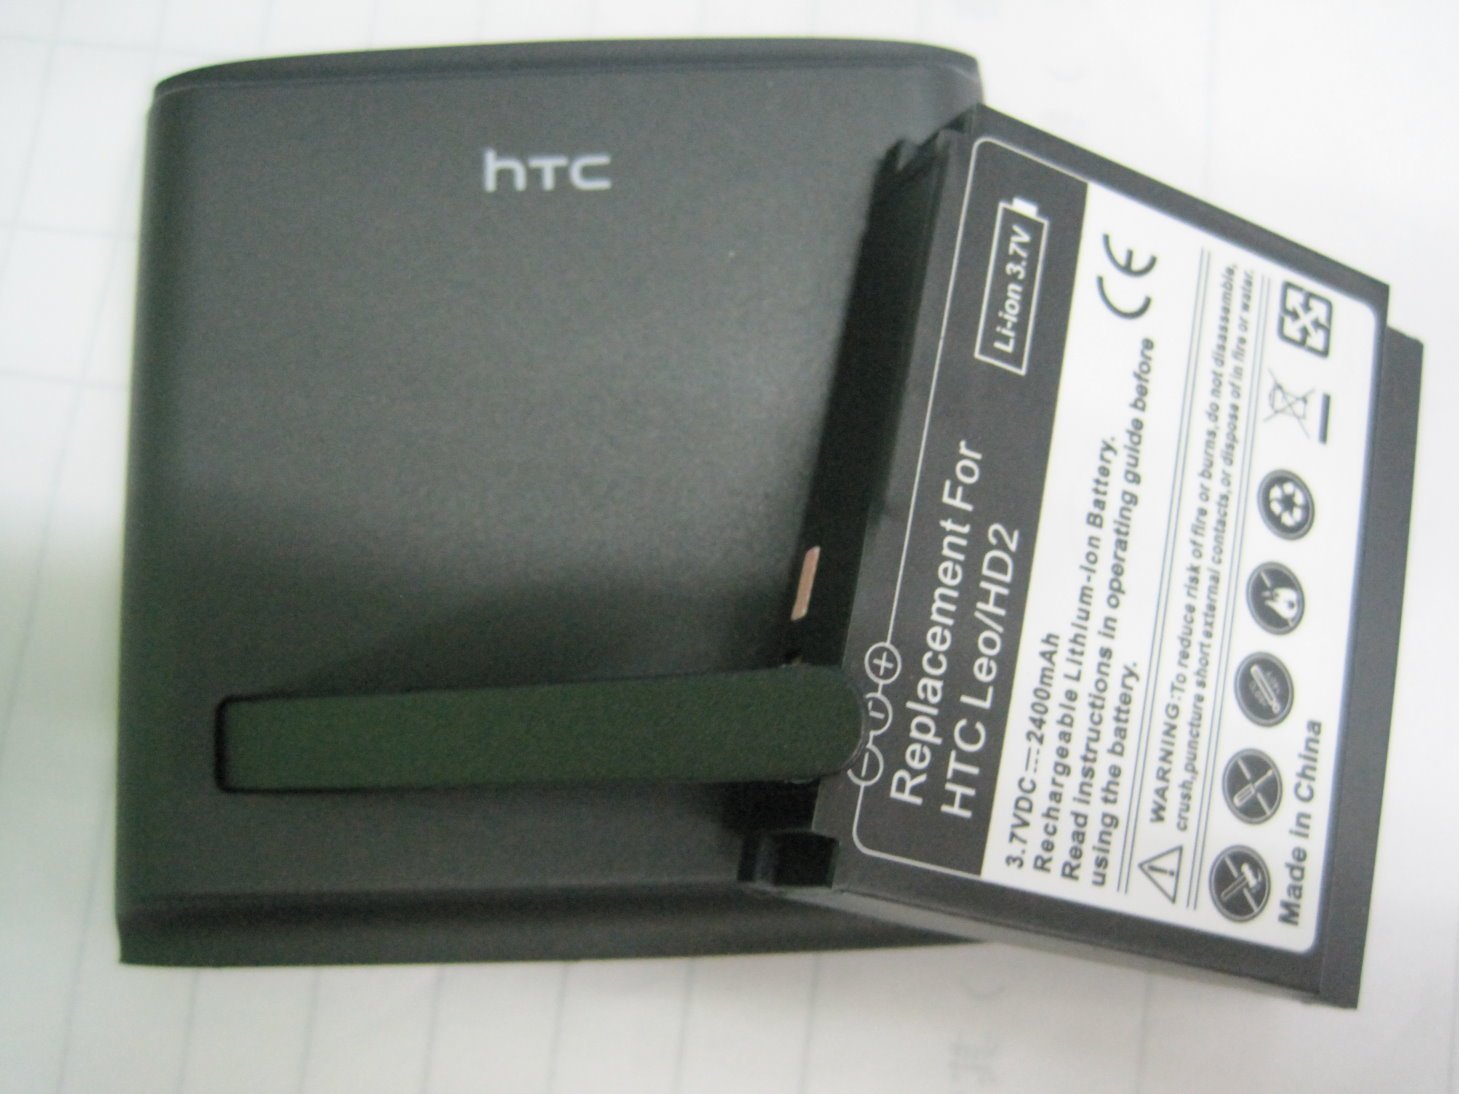 Htc hd2 battery cover